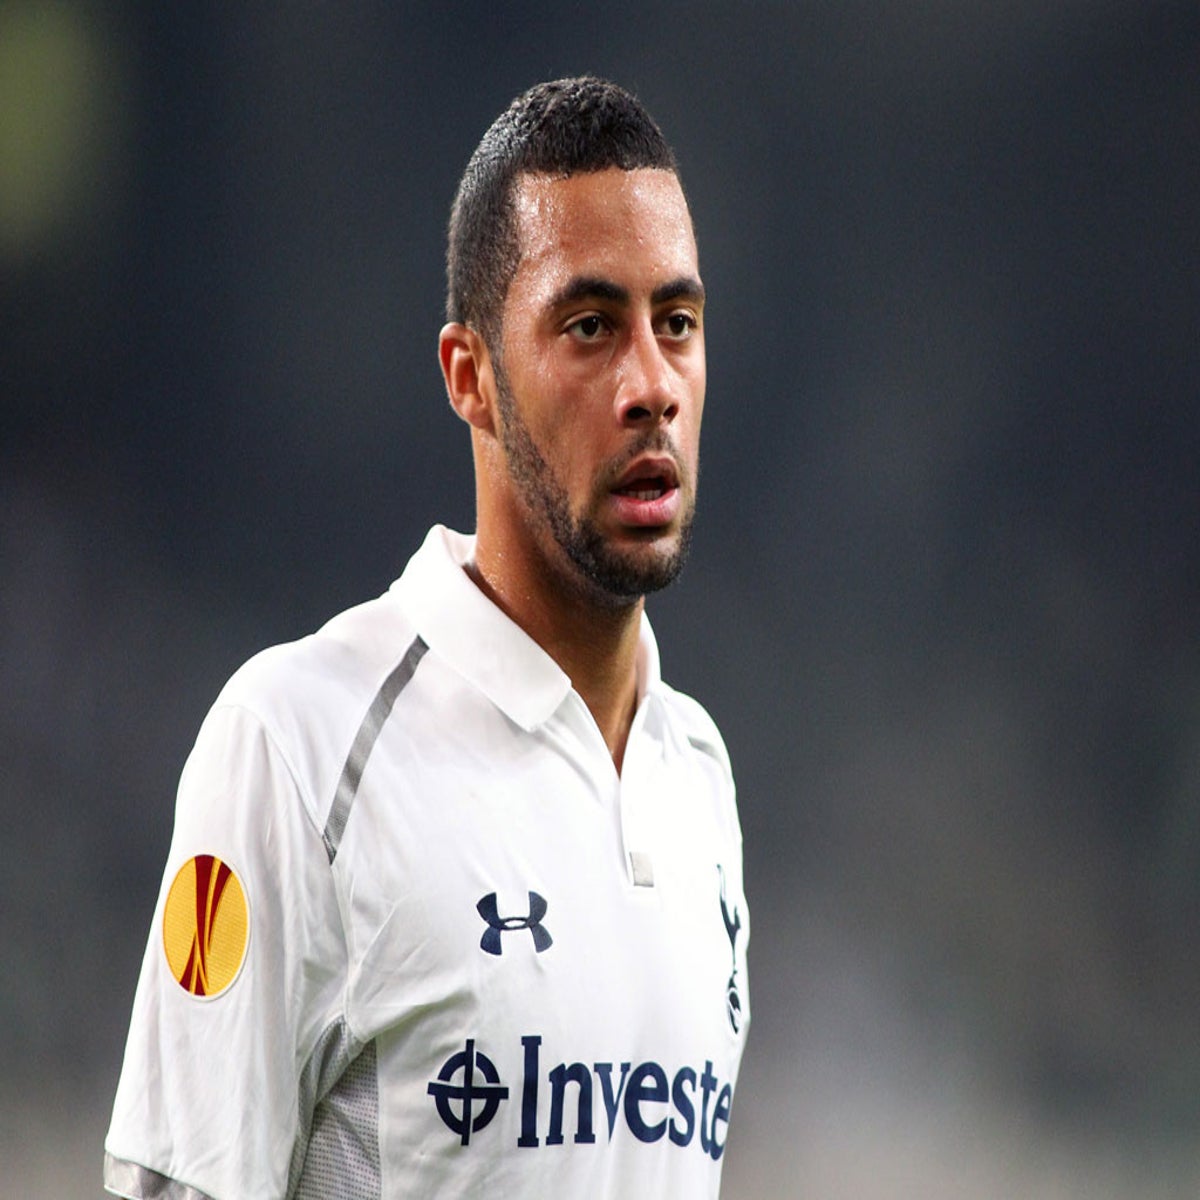 Tottenham are ready to sell Mousa Dembele 